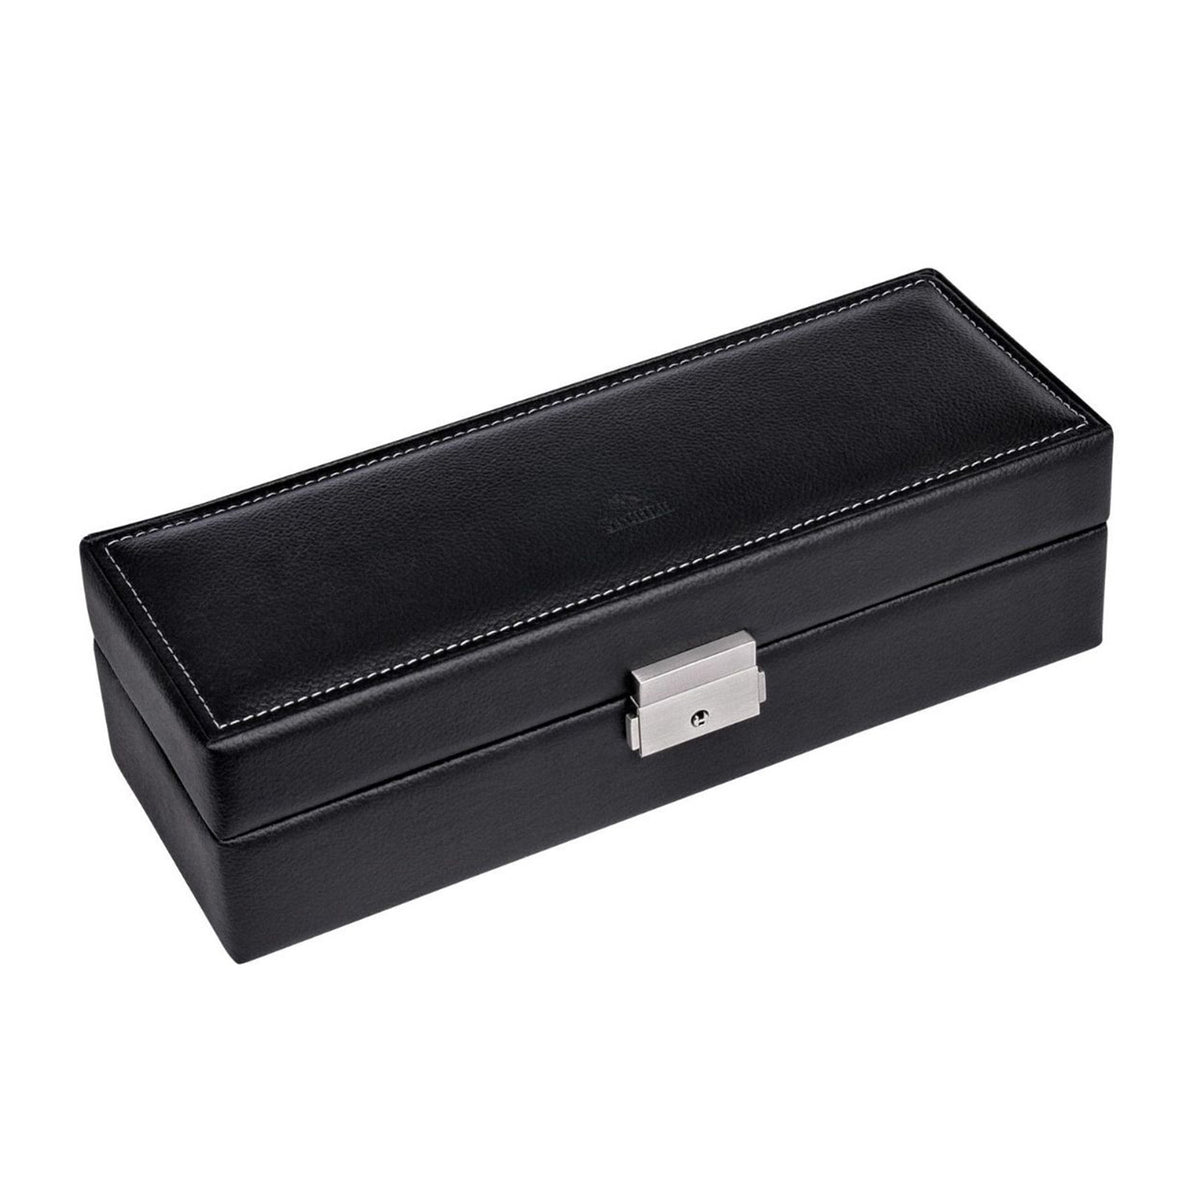 Watch case for 5 watches | Black | Italian leather